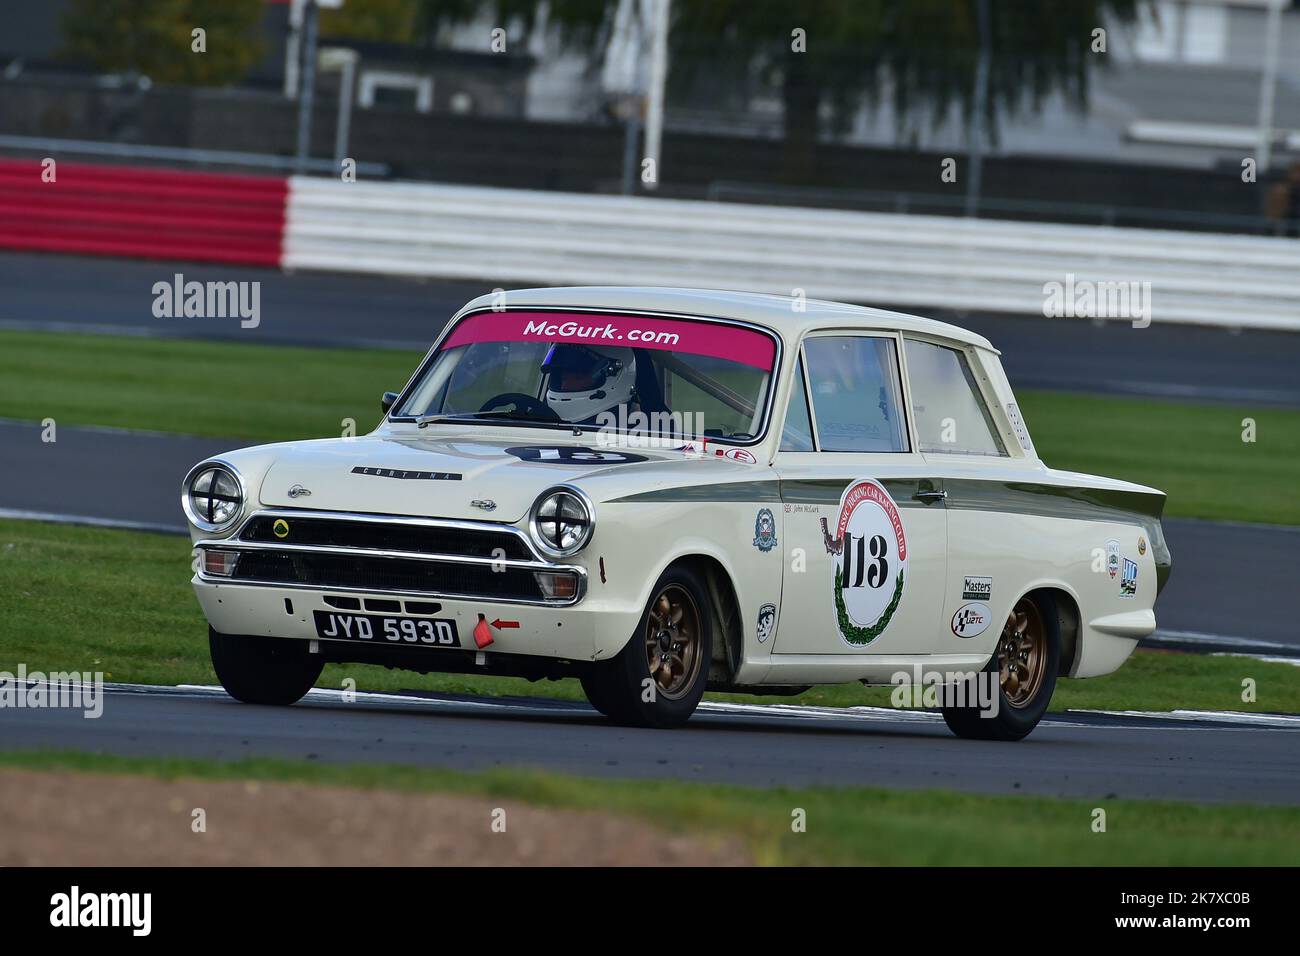 John McGurk, Ford Lotus Cortina, Mintex Classic K, a series of one hour races for pre-1966 GT and Touring cars compliant to the FIA Appendix K regulat Stock Photo